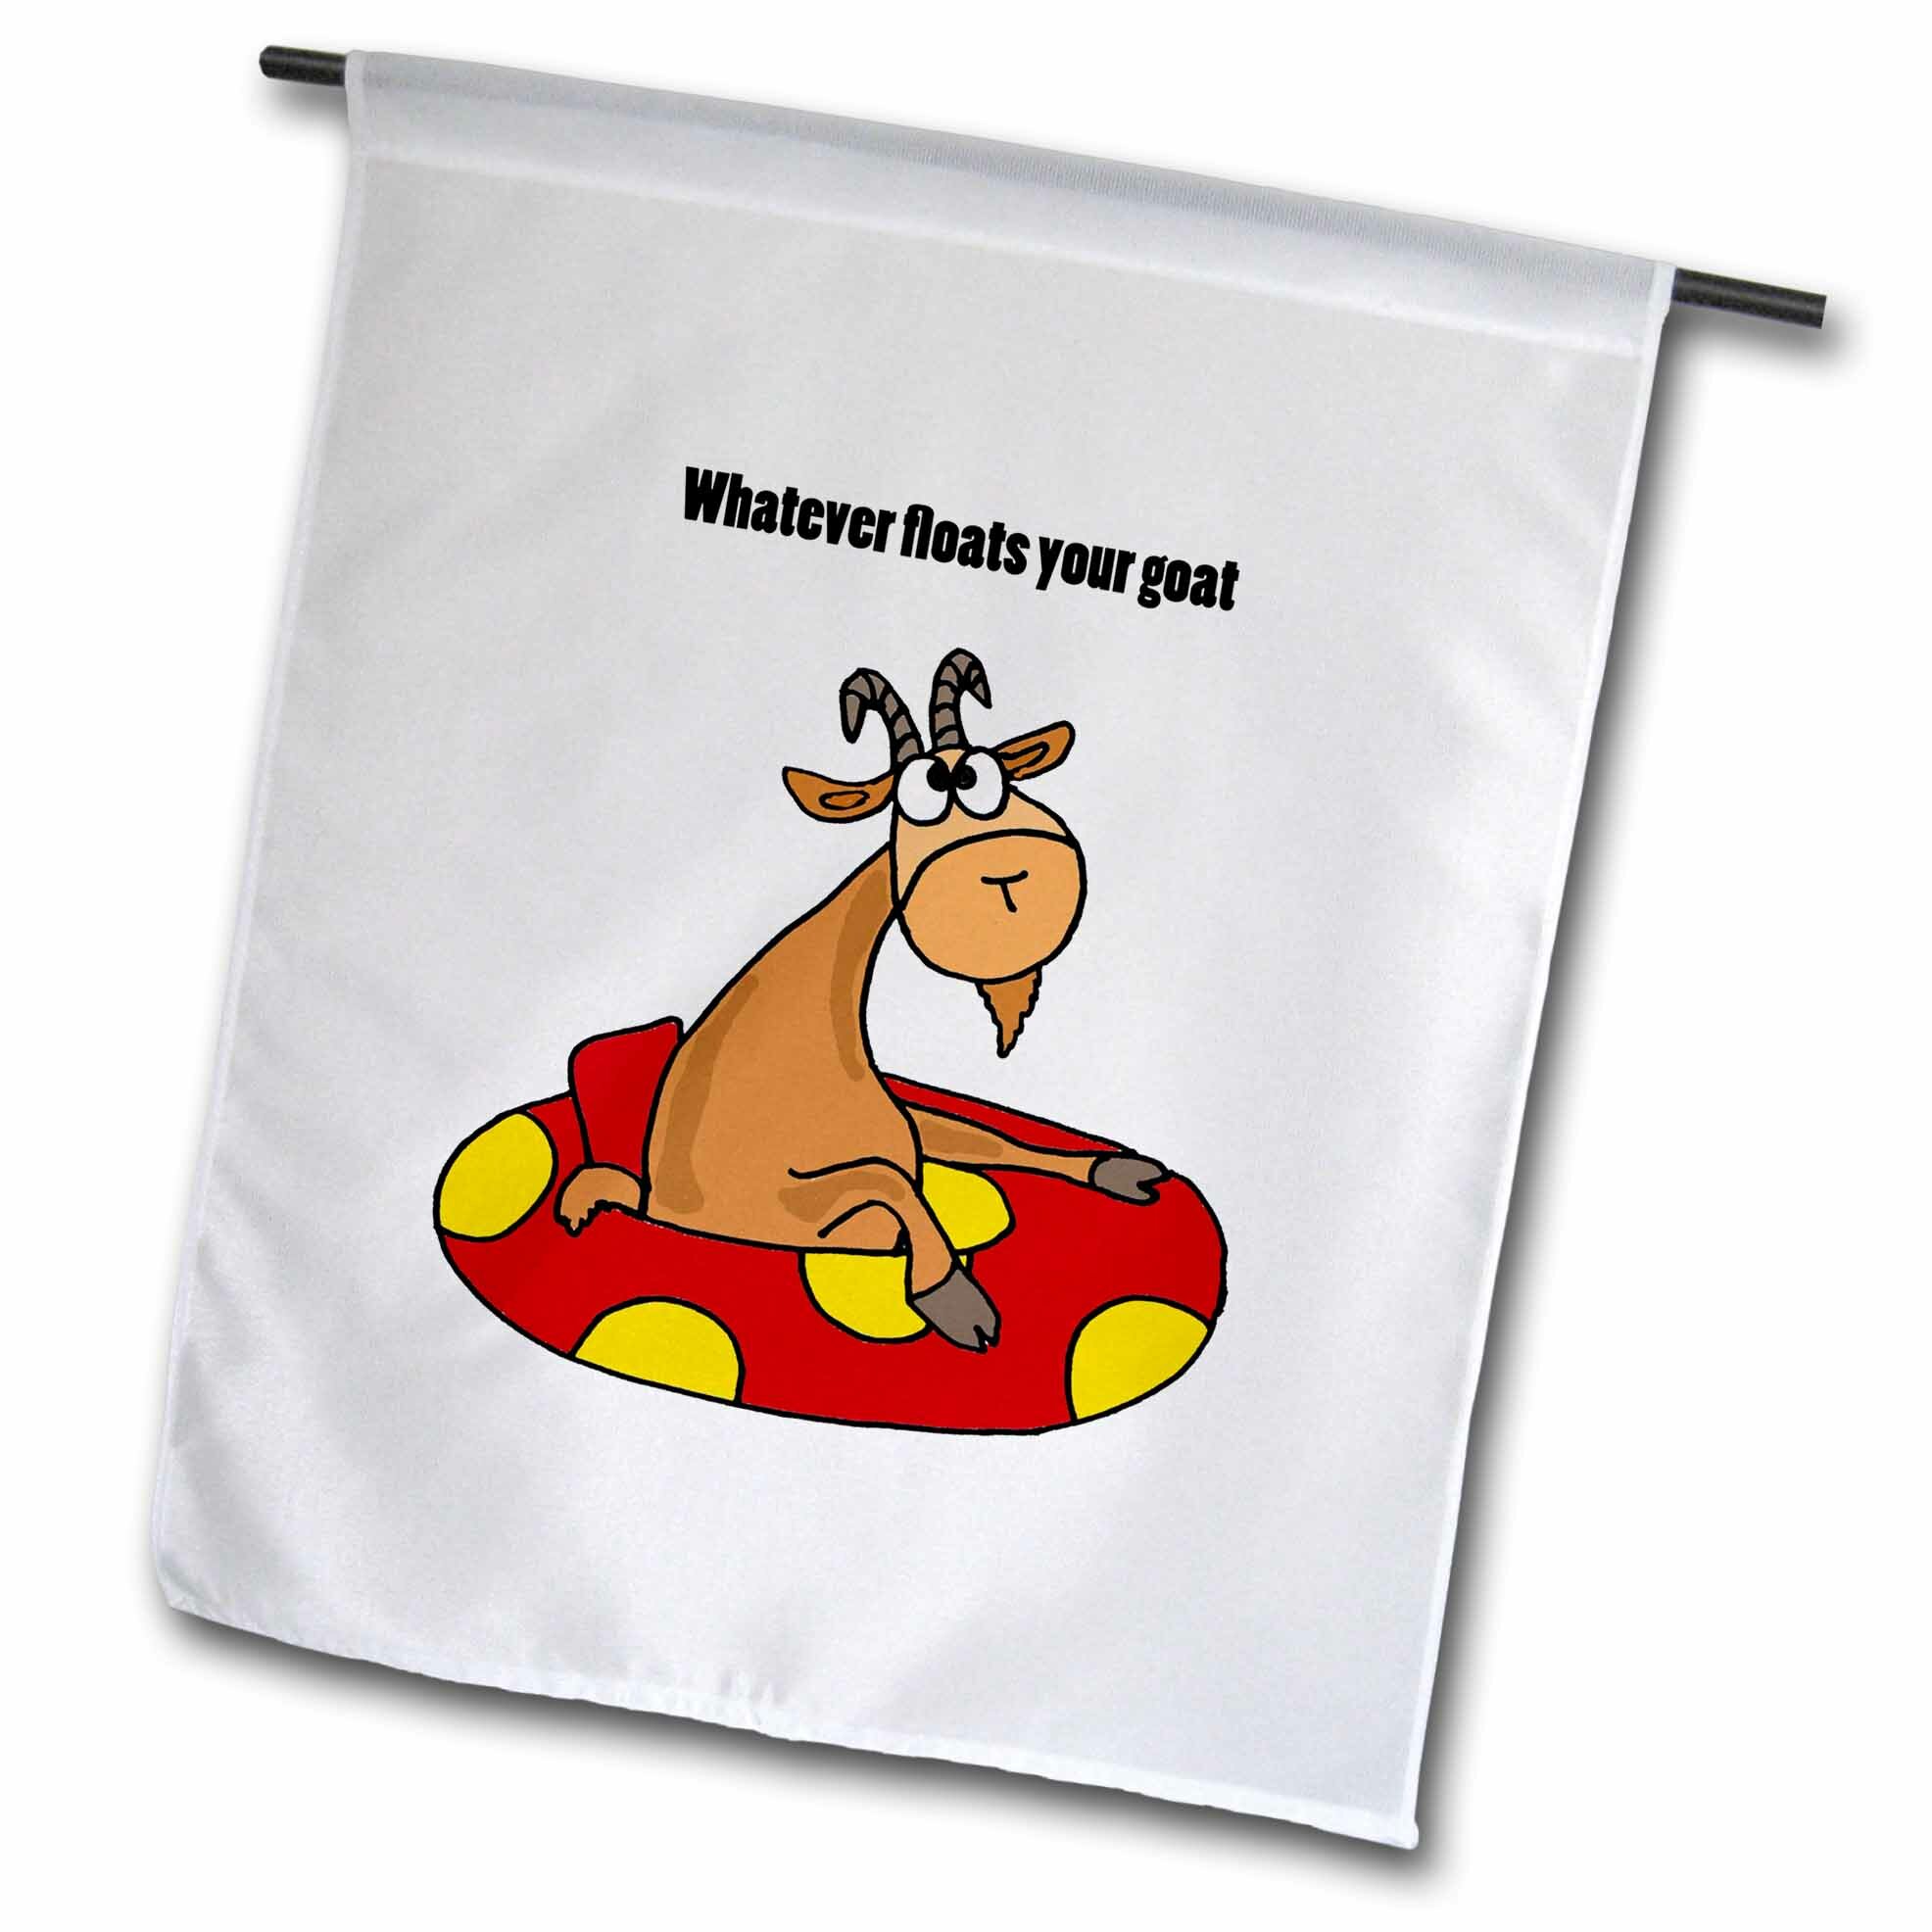 Goat Towel Whatever floats your goat